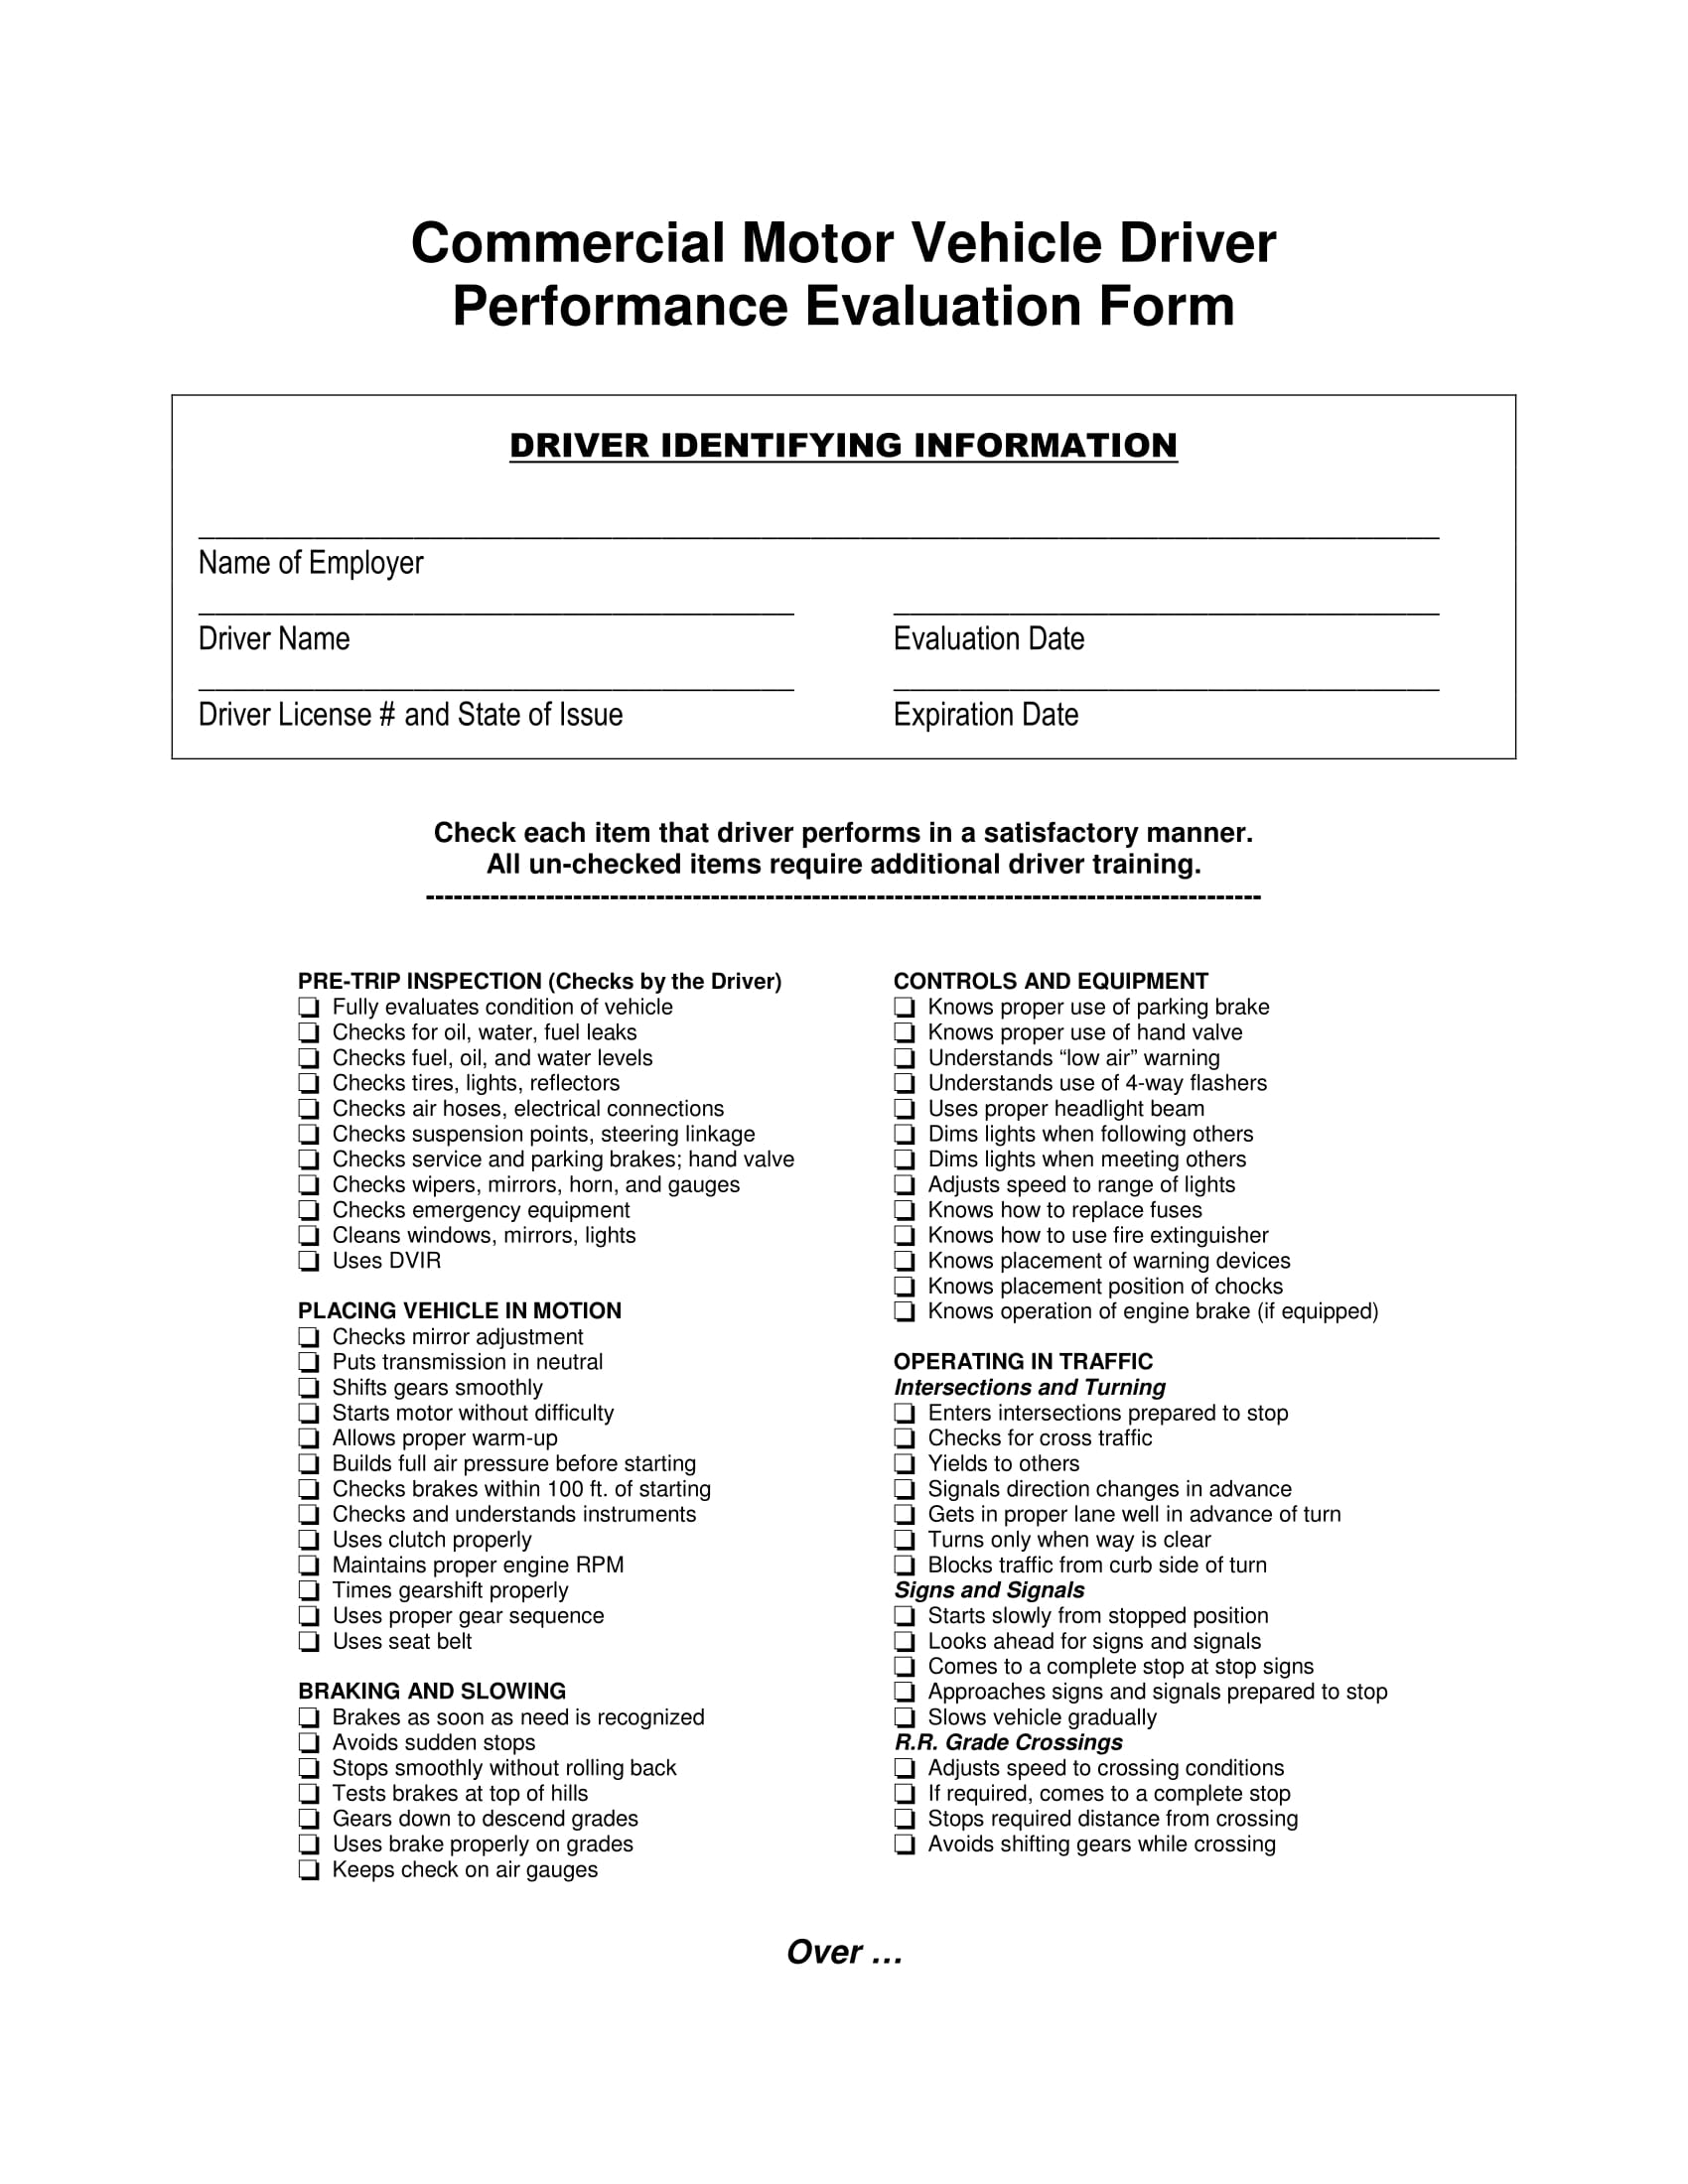 vehicle driver performance evaluation form 1